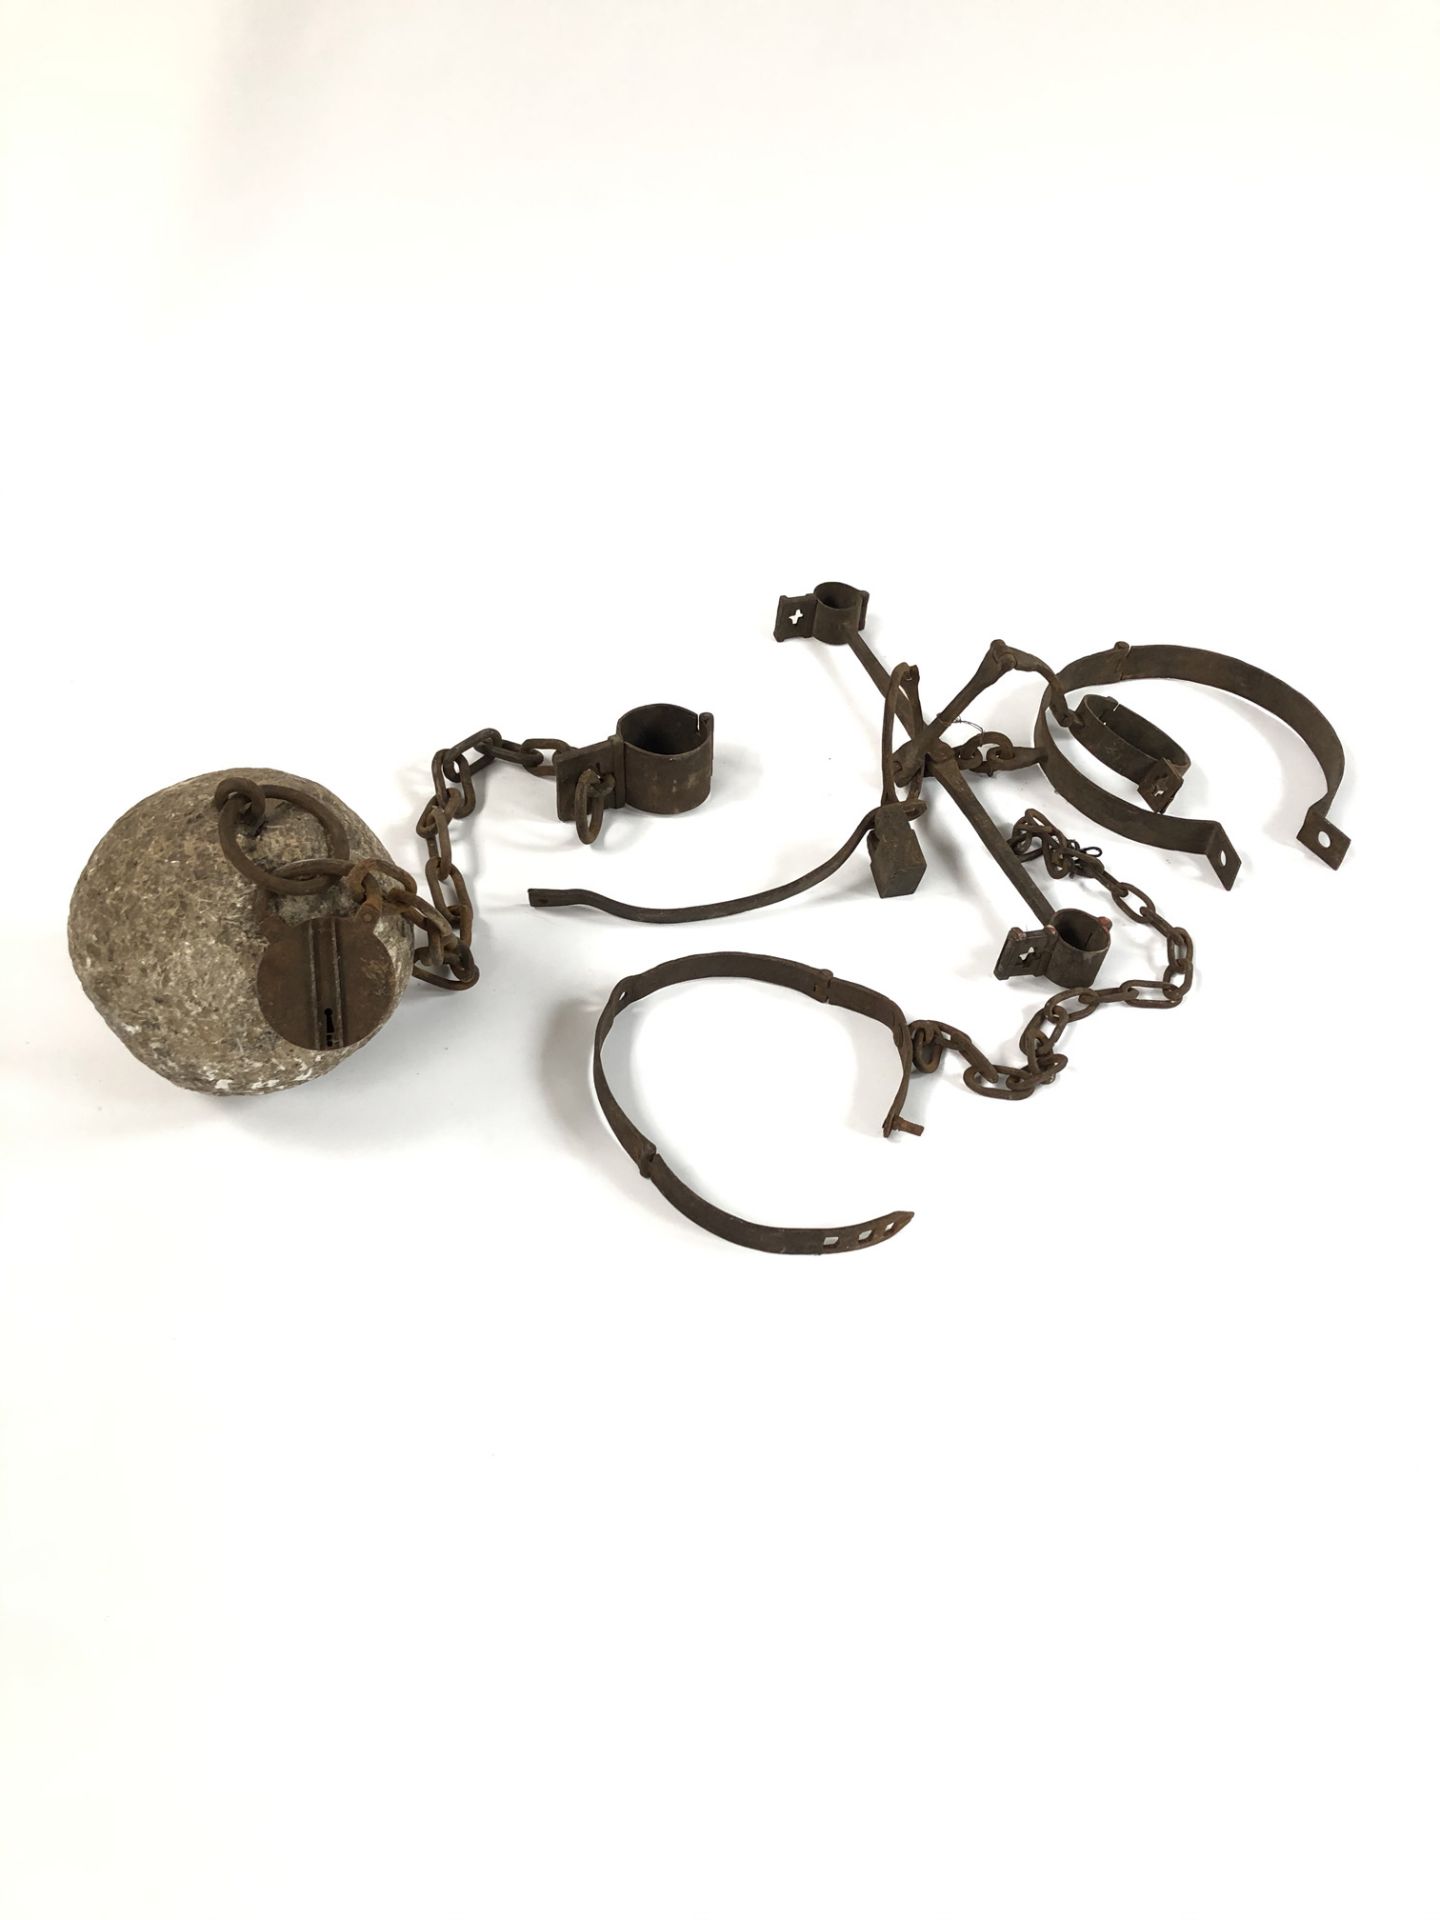 Antique Medieval Shackles ca. 1700 - Image 2 of 3